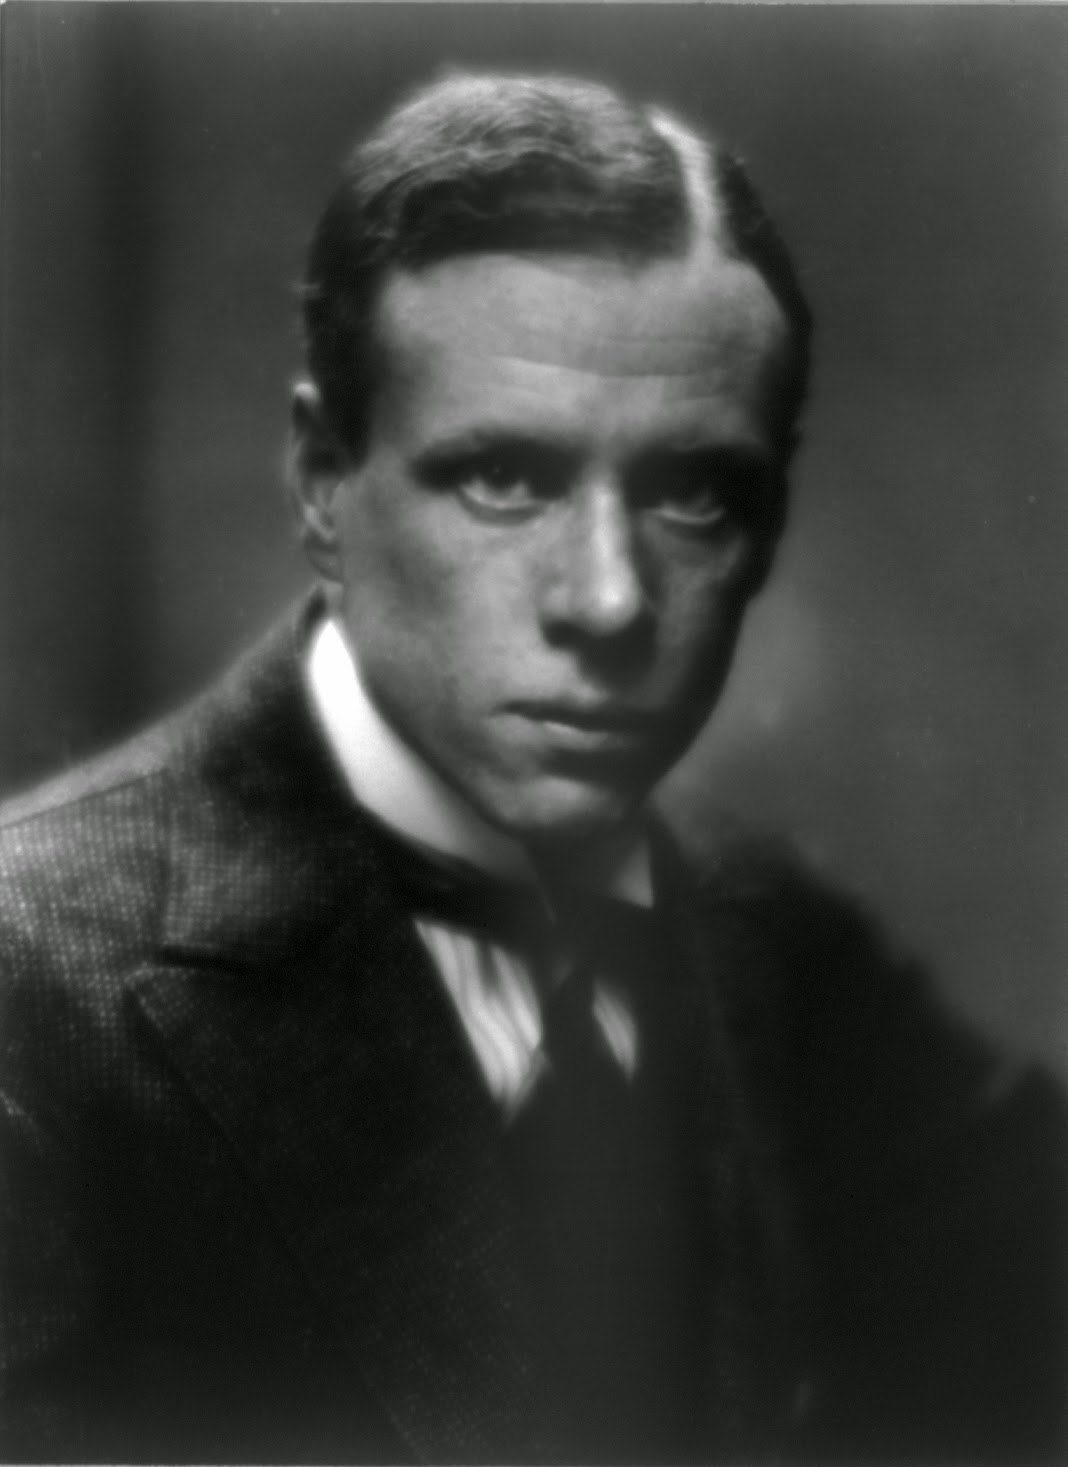 Photo of Sinclair Lewis. Image Source: http://upload.wikimedia.org/wikipedia/commons/6/6c/Lewis-Sinclair-LOC.jpg